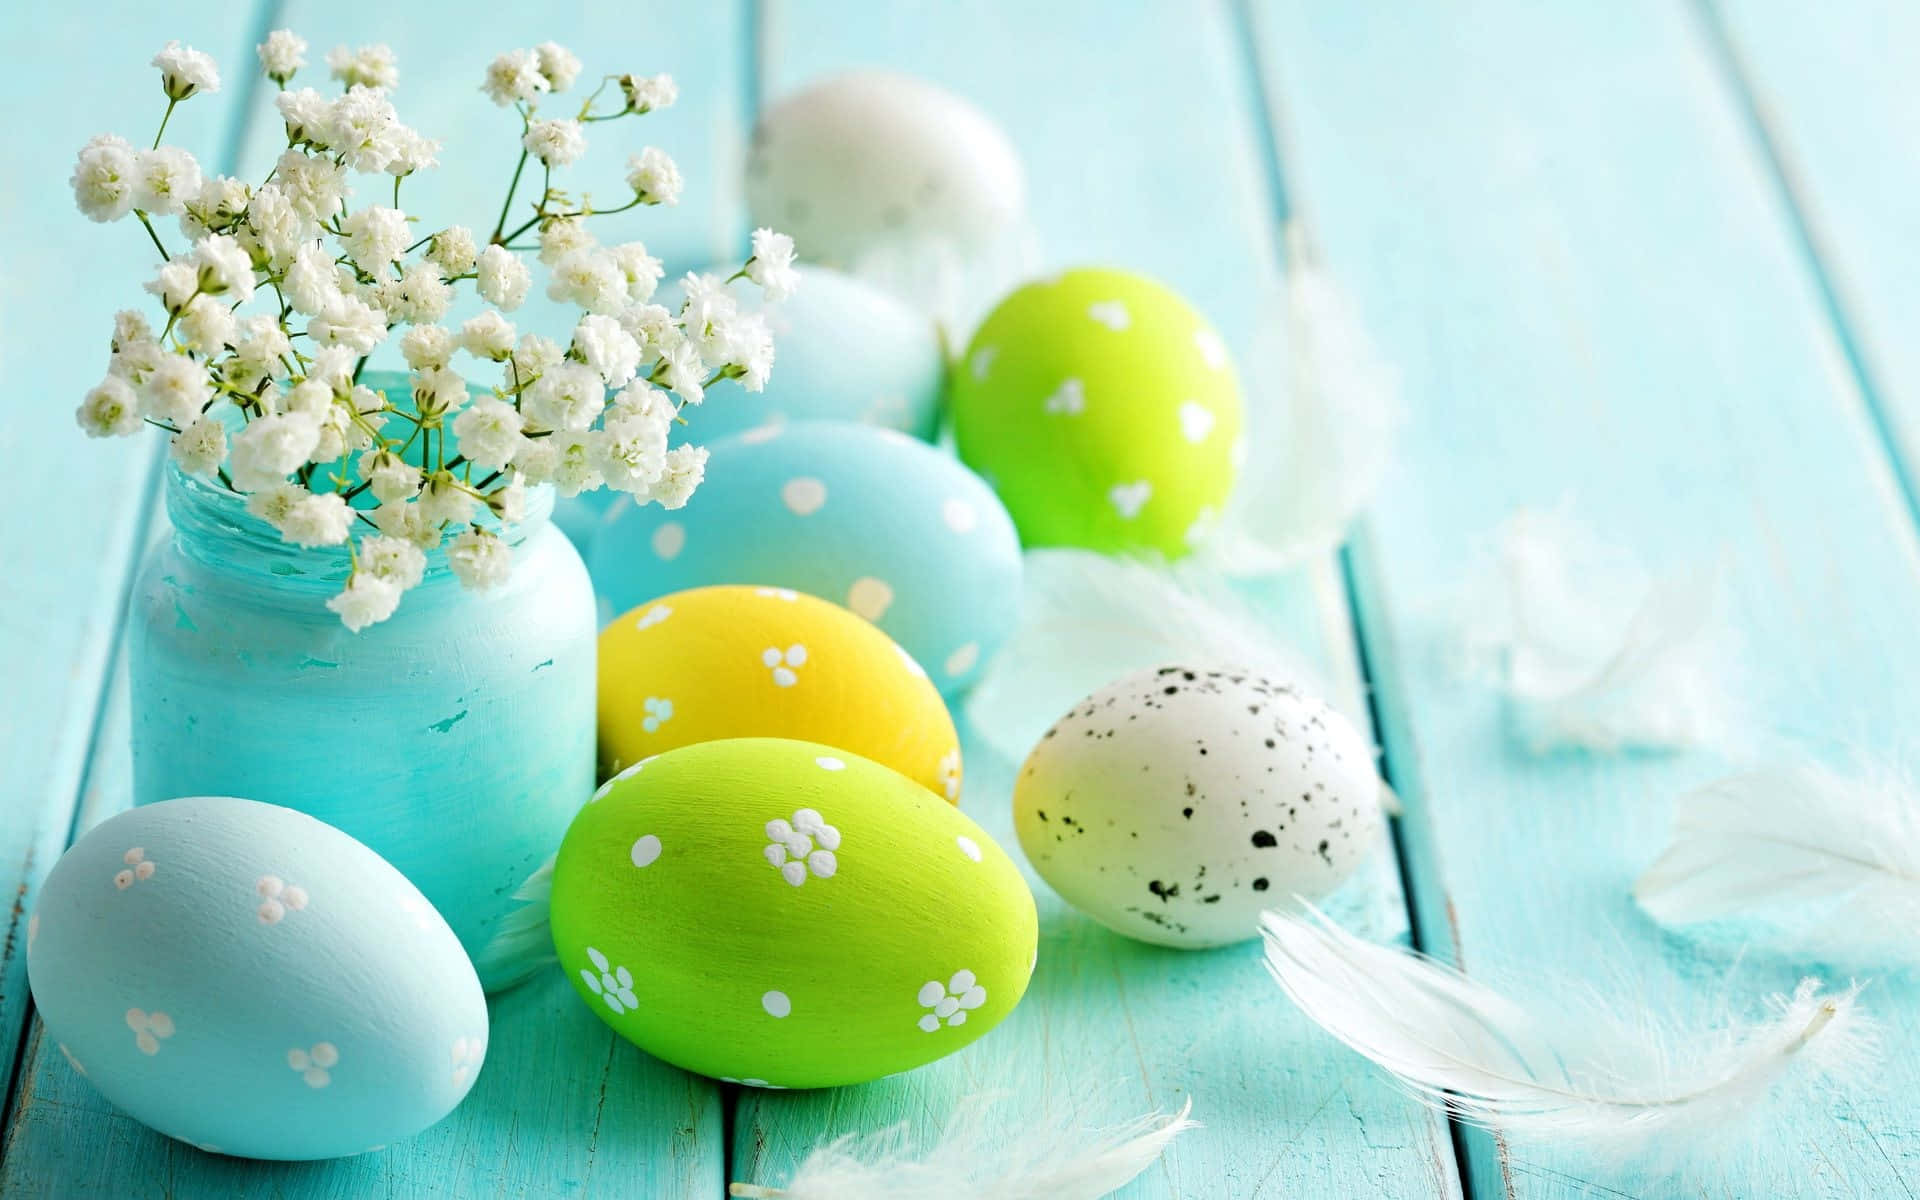 Adorable Easter Bunny Hopping in Colorful Decorative Eggs